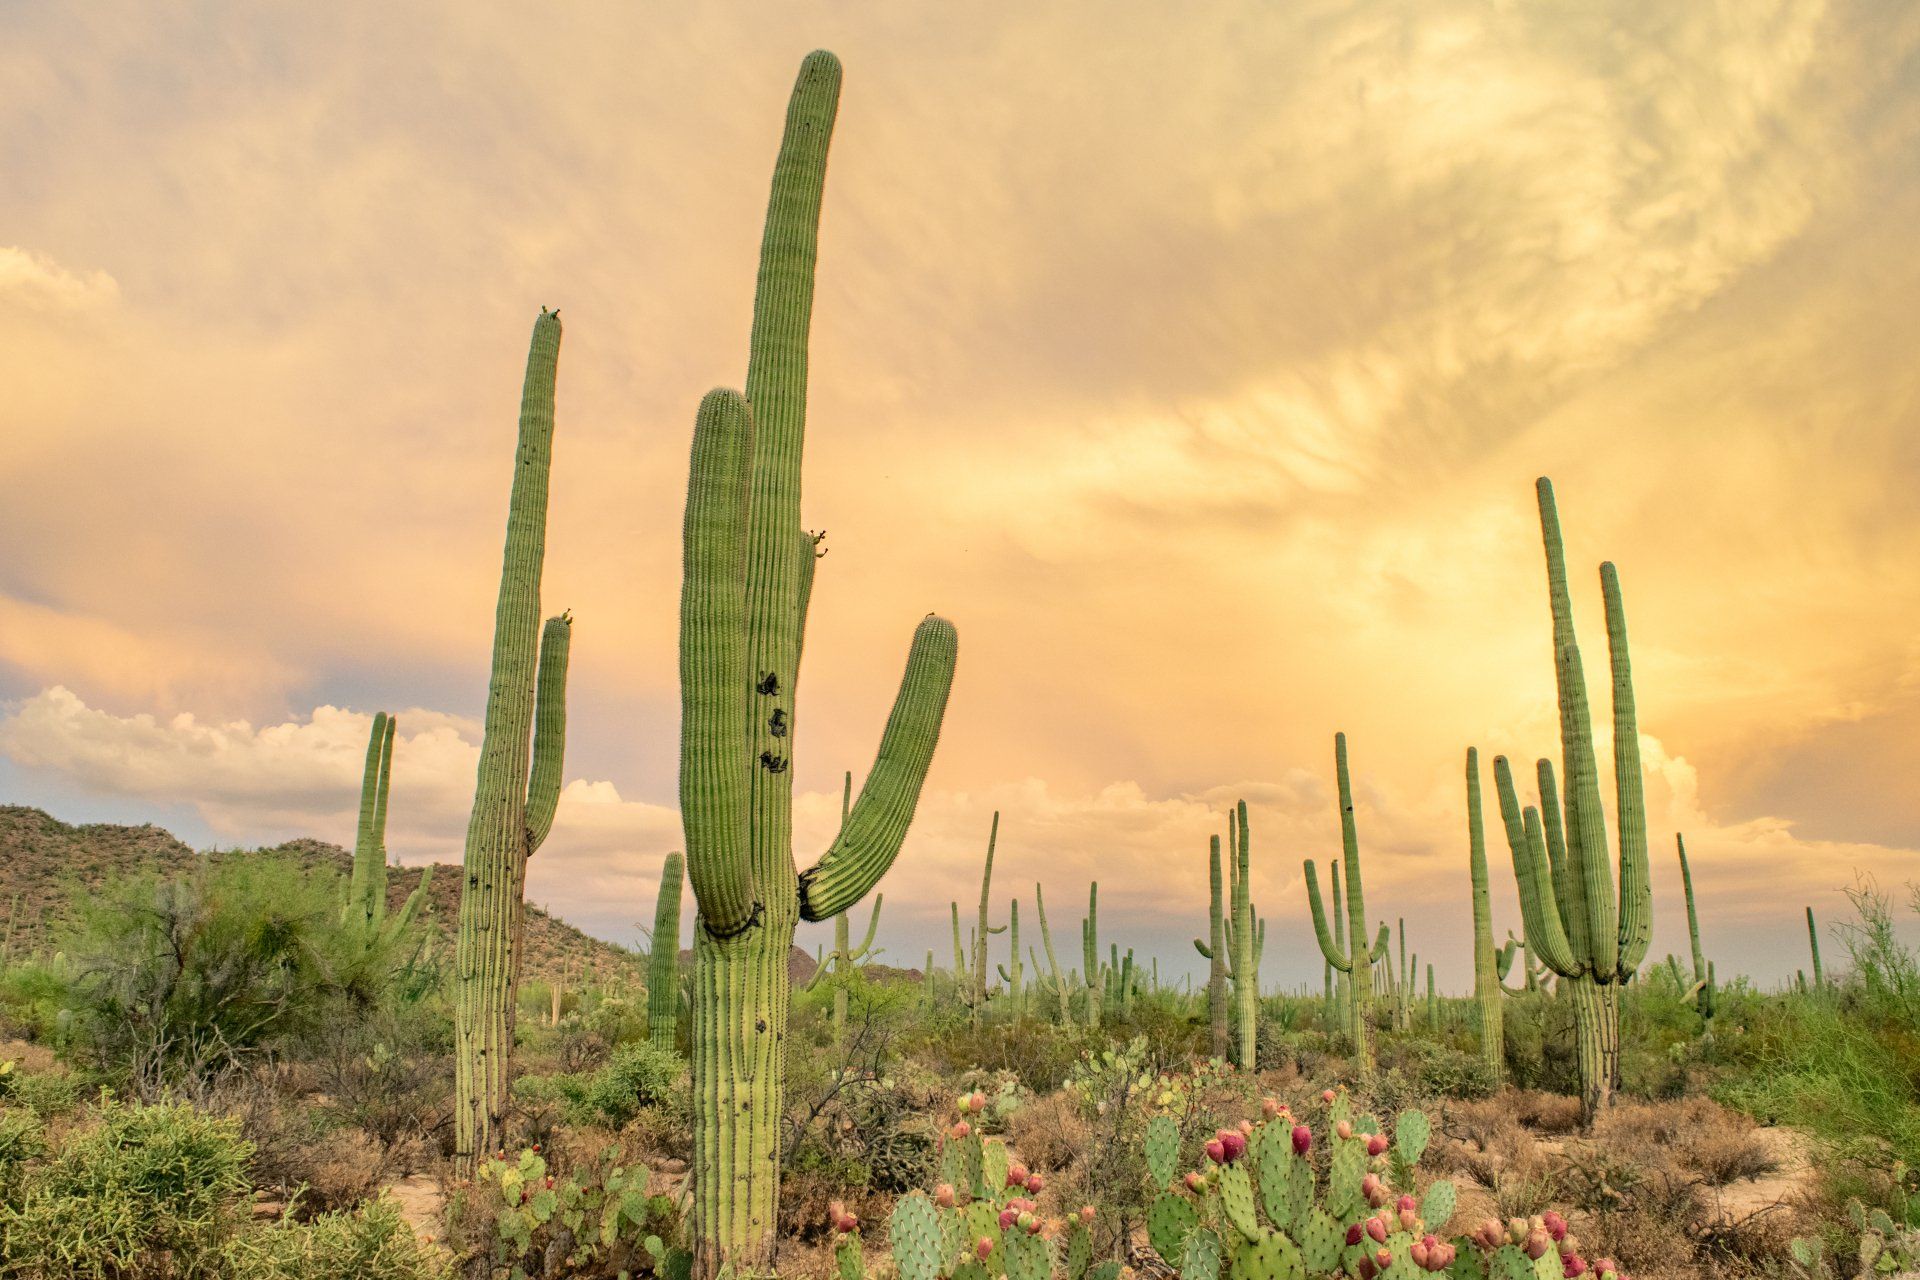 a row of saguaro cactus growing in the desert at sunset .